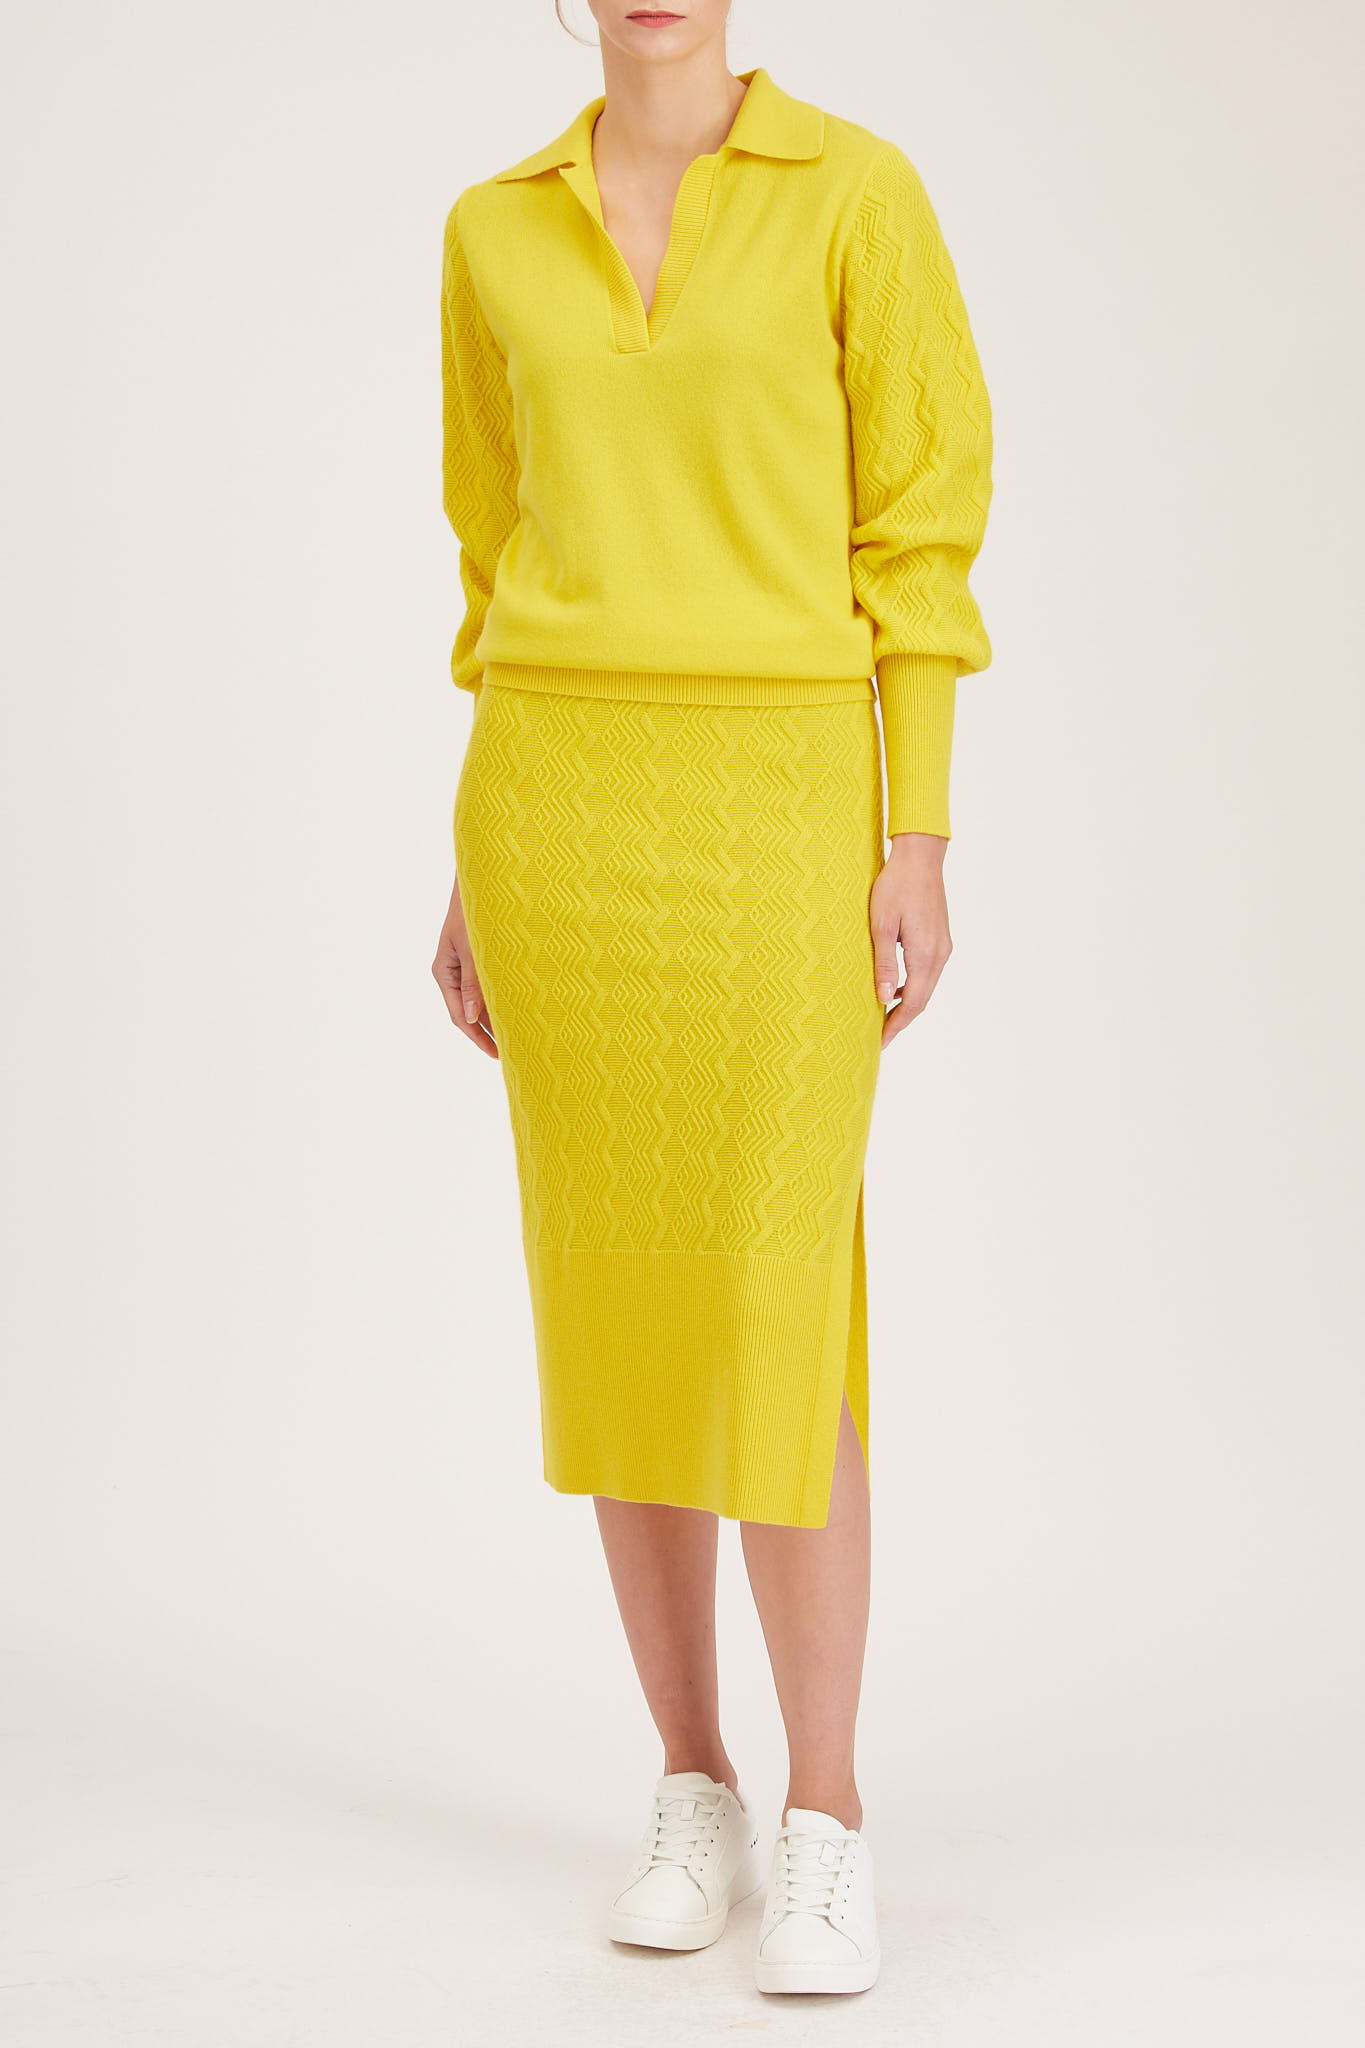 Rouen Knit Skirt – Knitted pencil skirt with side slit in yellow cashmere